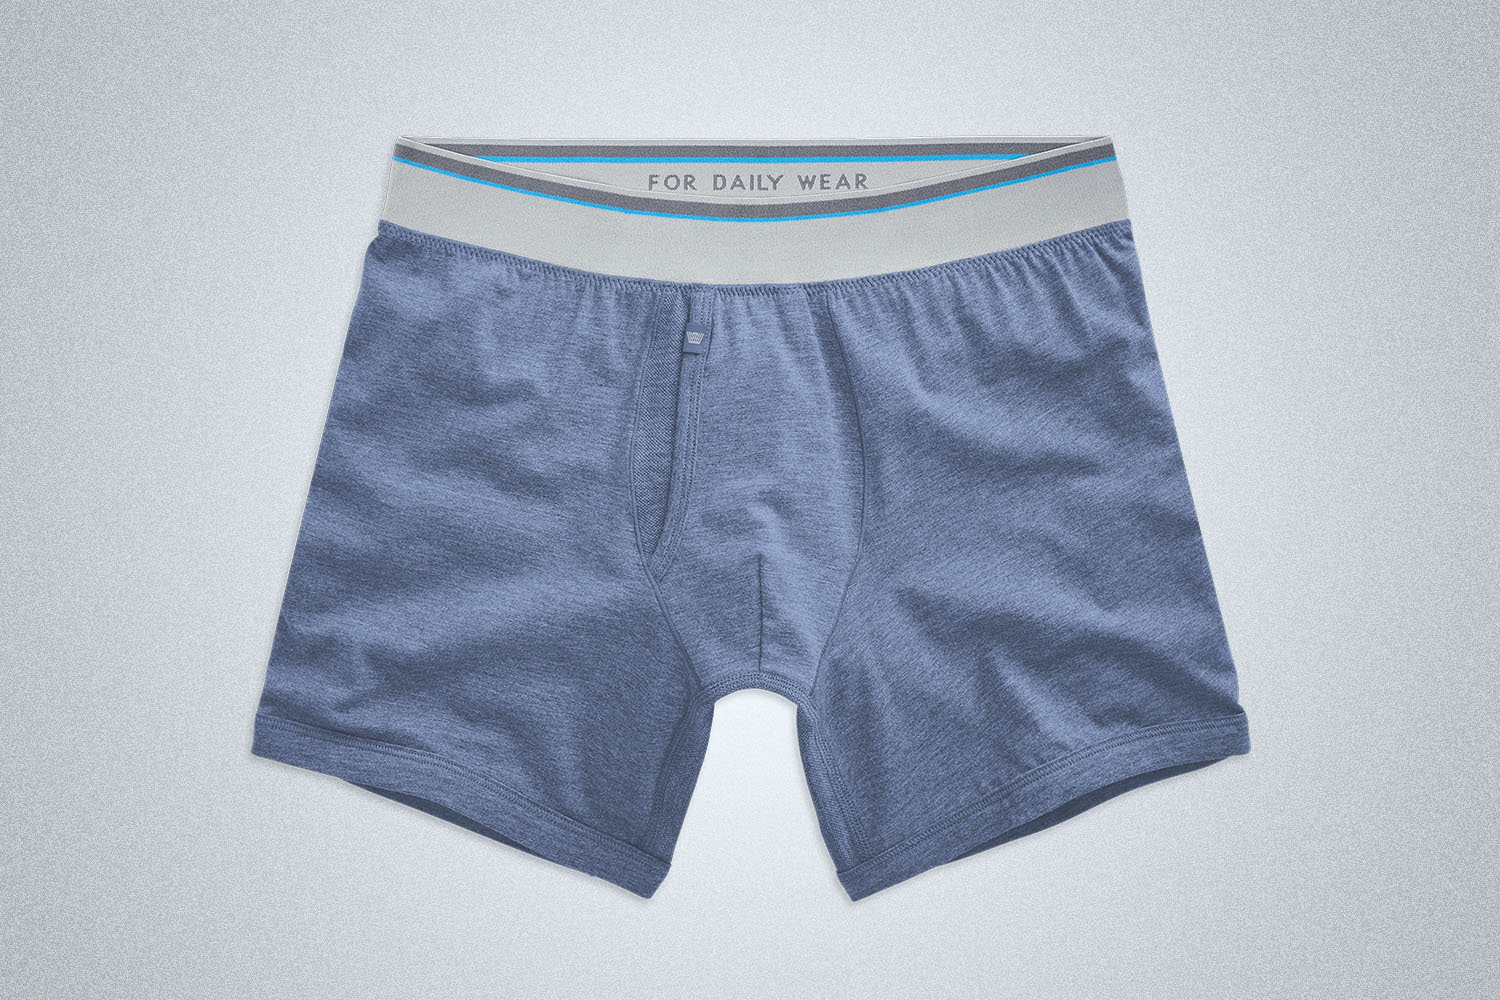 a pair of blue boxer briefs from Mack Weldon on a grey background